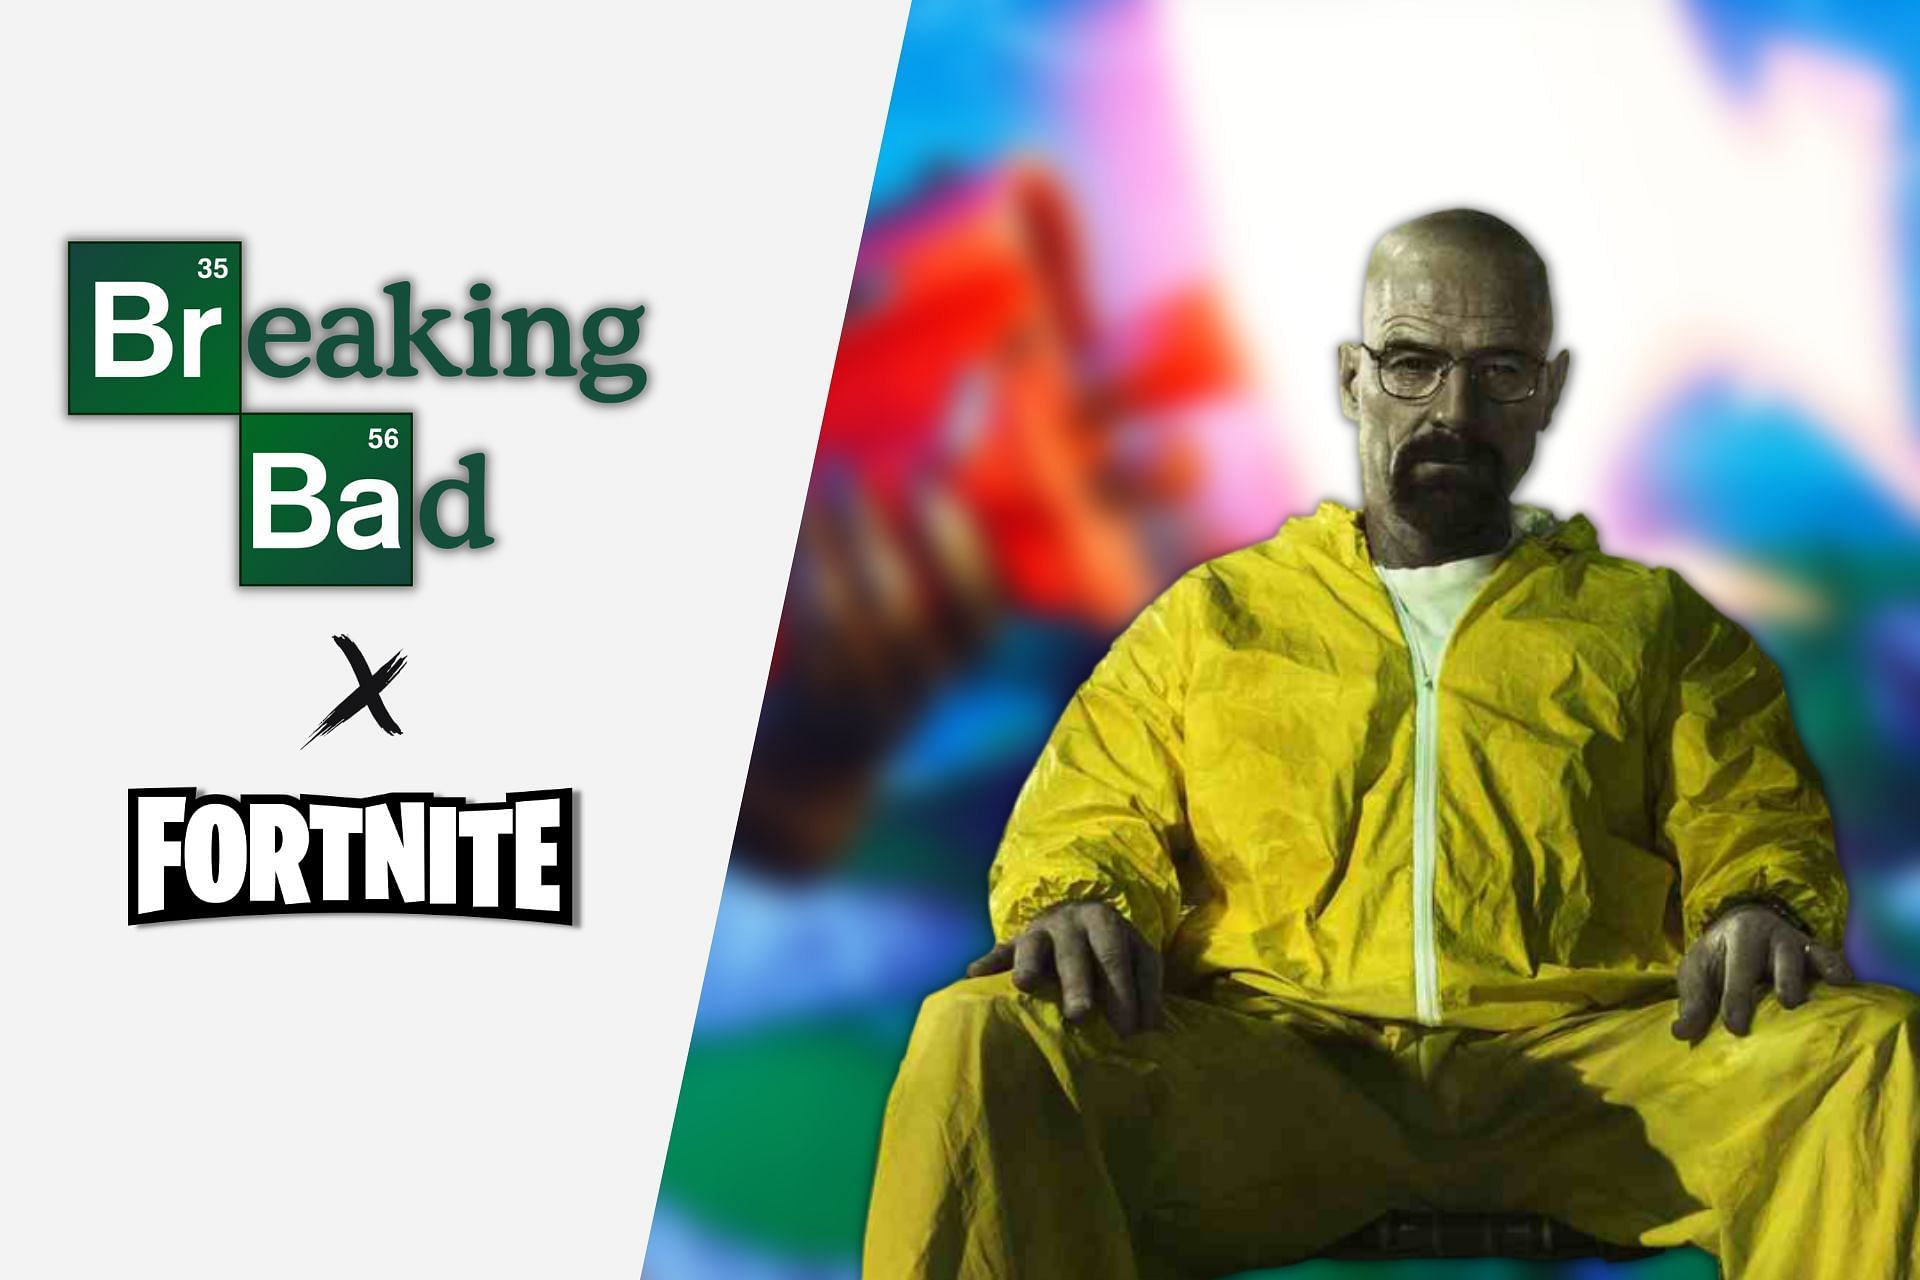 The Fortnite x Breaking Bad collab might never become a reality (Image via Sportskeeda)